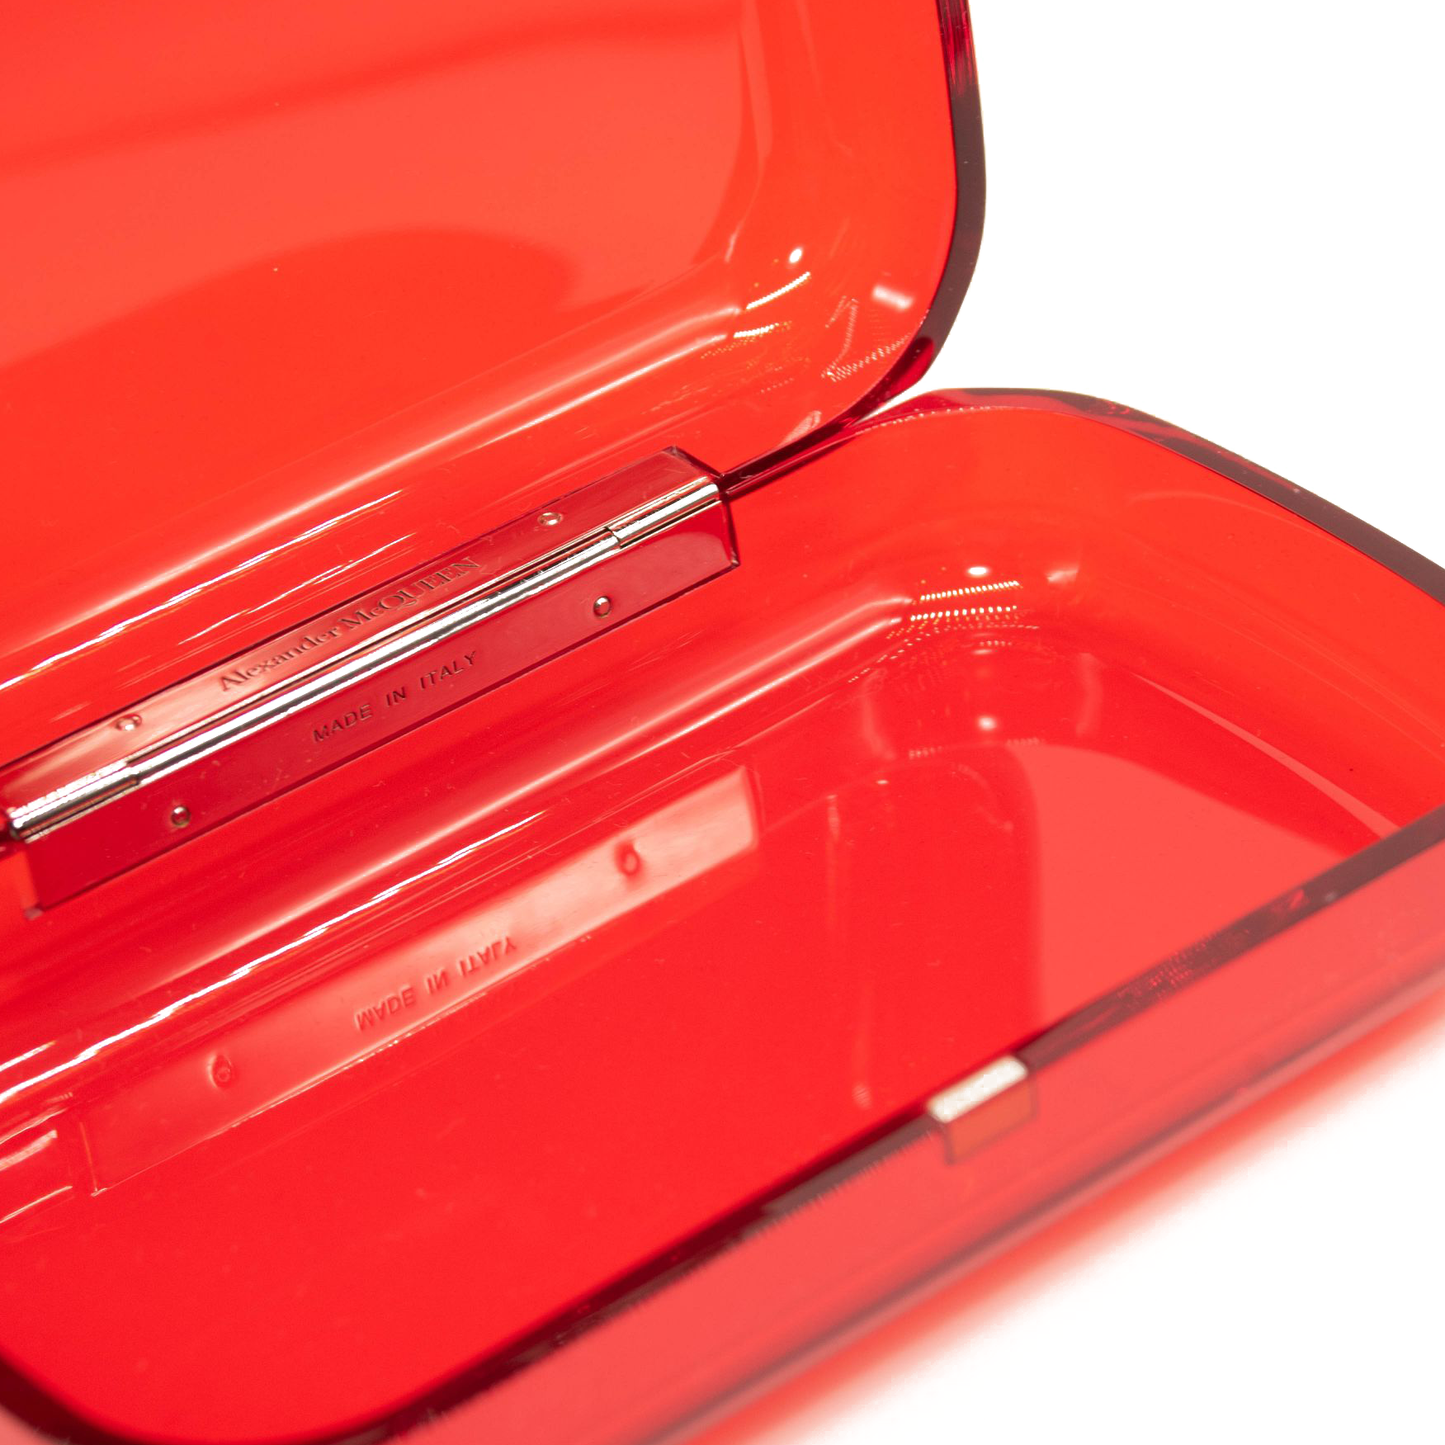 NEW Alexander McQueen Four-Ring Clear Box Clutch Dark Coral Red